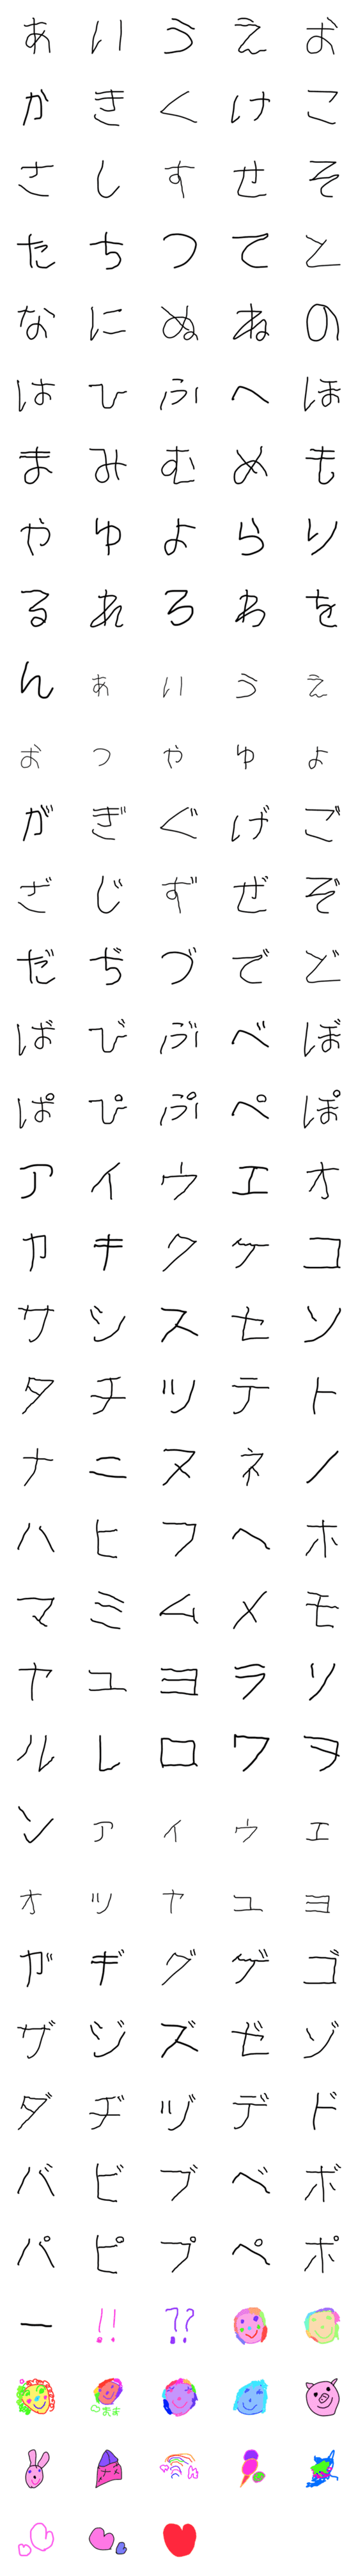 [LINE絵文字]5歳の子どもが書いた文字の画像一覧